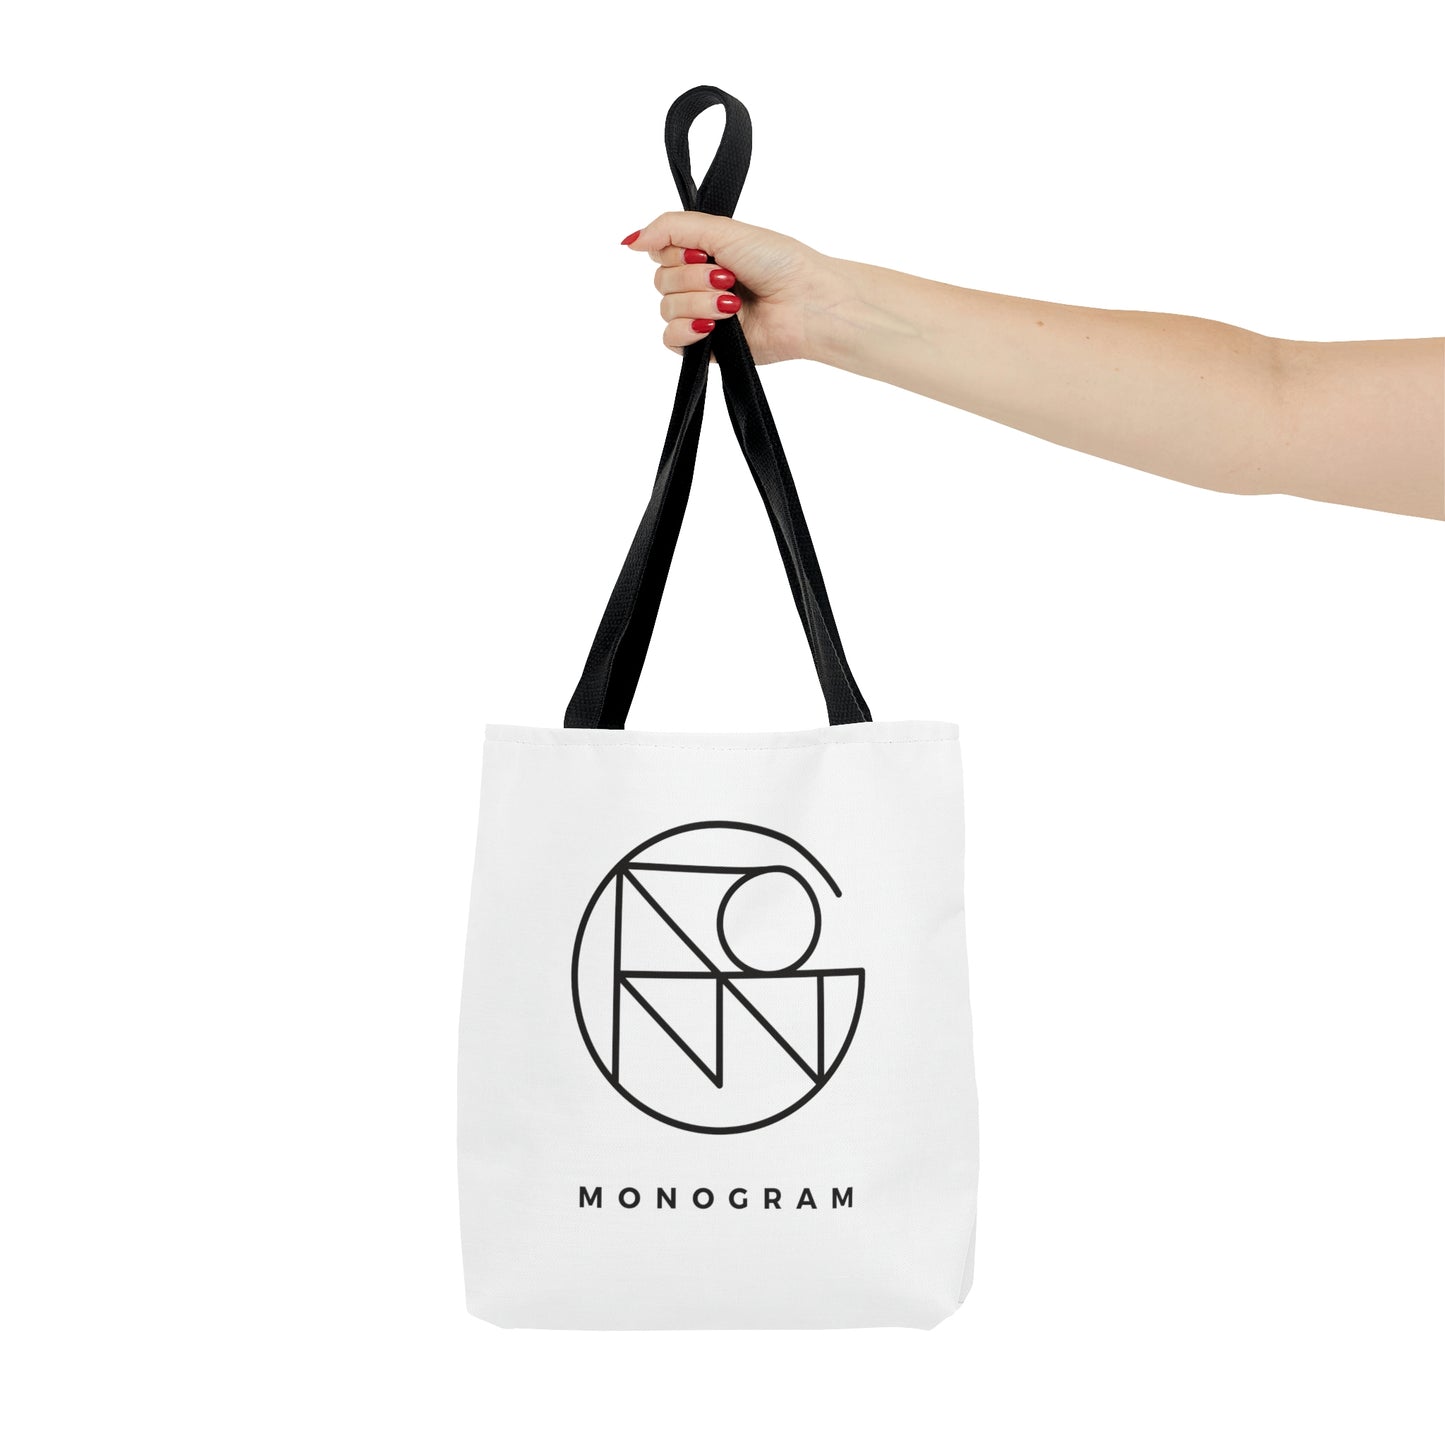 Tote Bag with Design